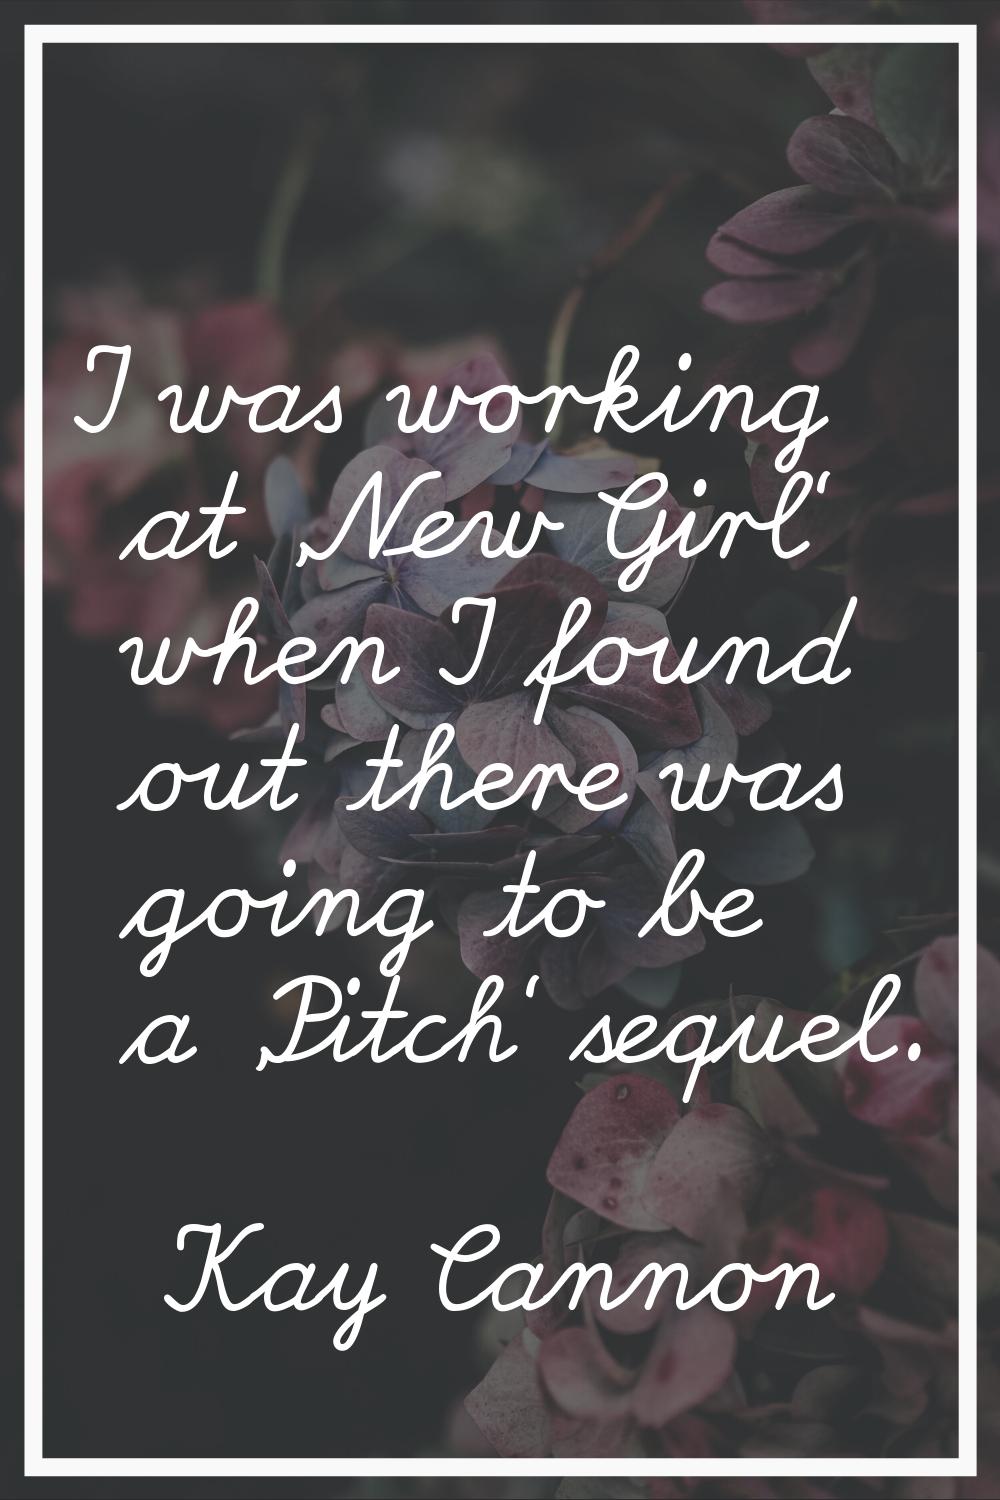 I was working at 'New Girl' when I found out there was going to be a 'Pitch' sequel.